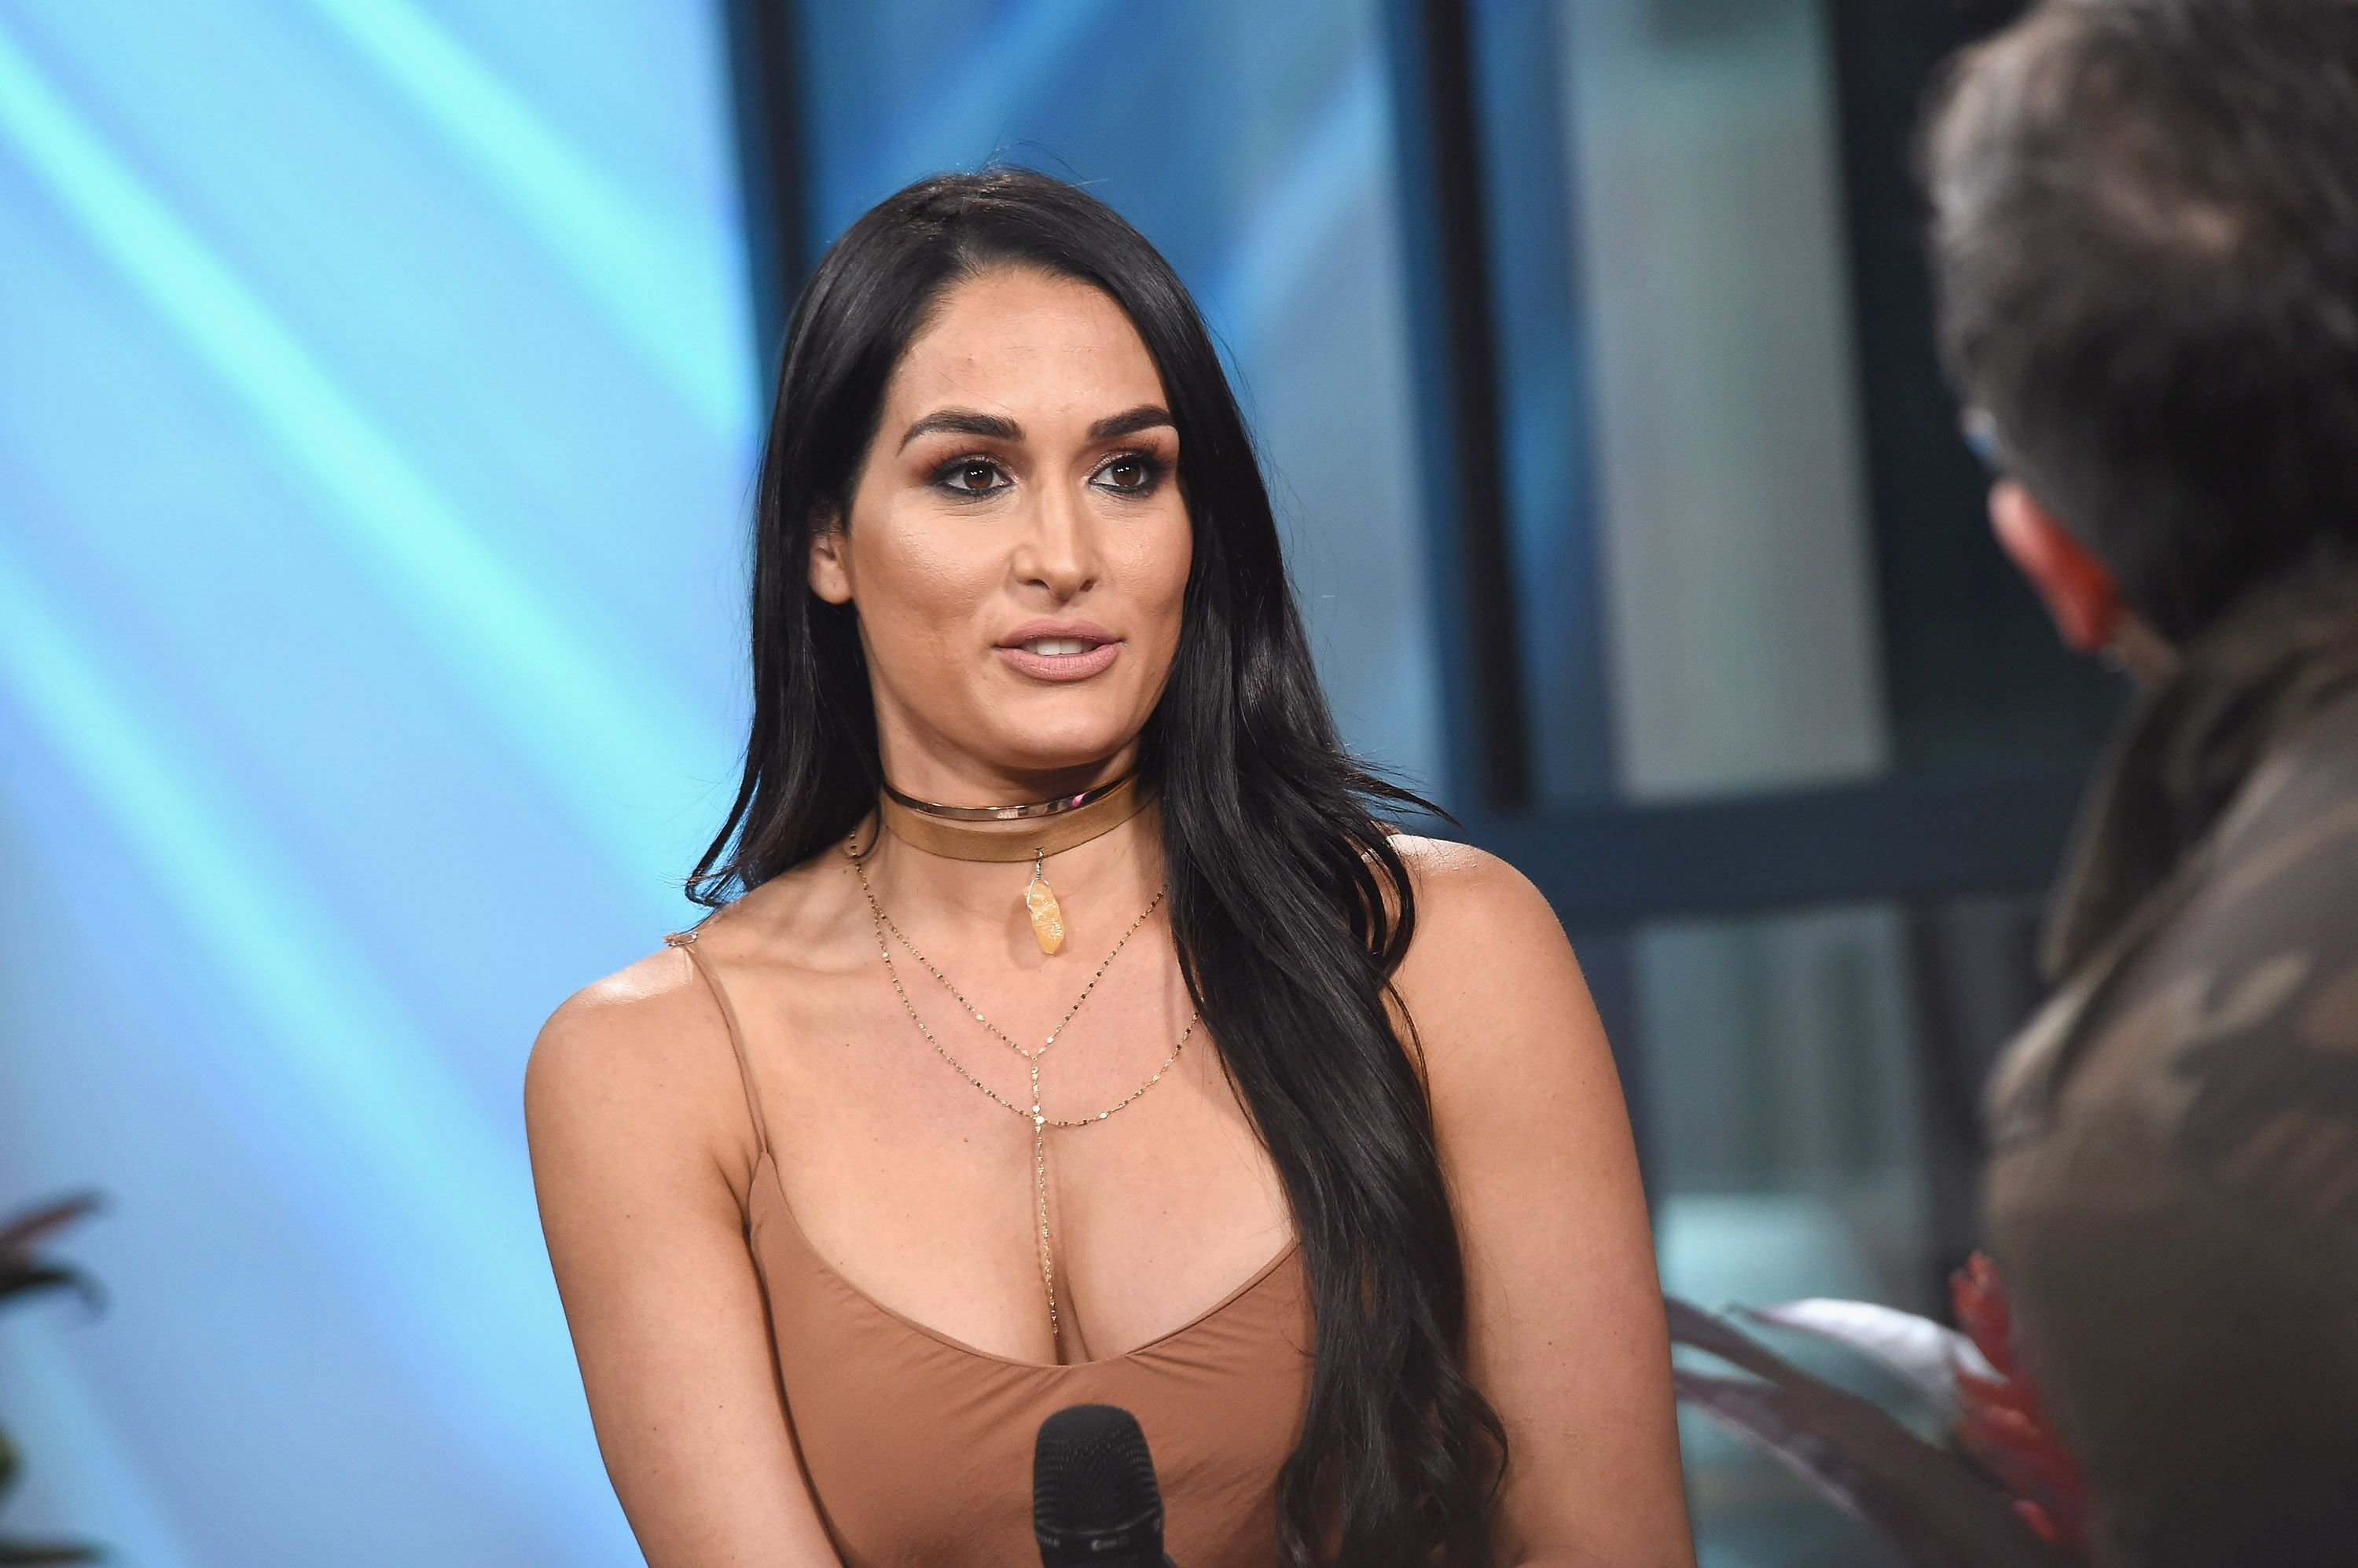 Nikki Bella at the Build Series to discuss the reality series "Total Divas" at Build Studio on April 5, 2017, in New York City | Photo: Gary Gershoff/WireImage/Getty Images